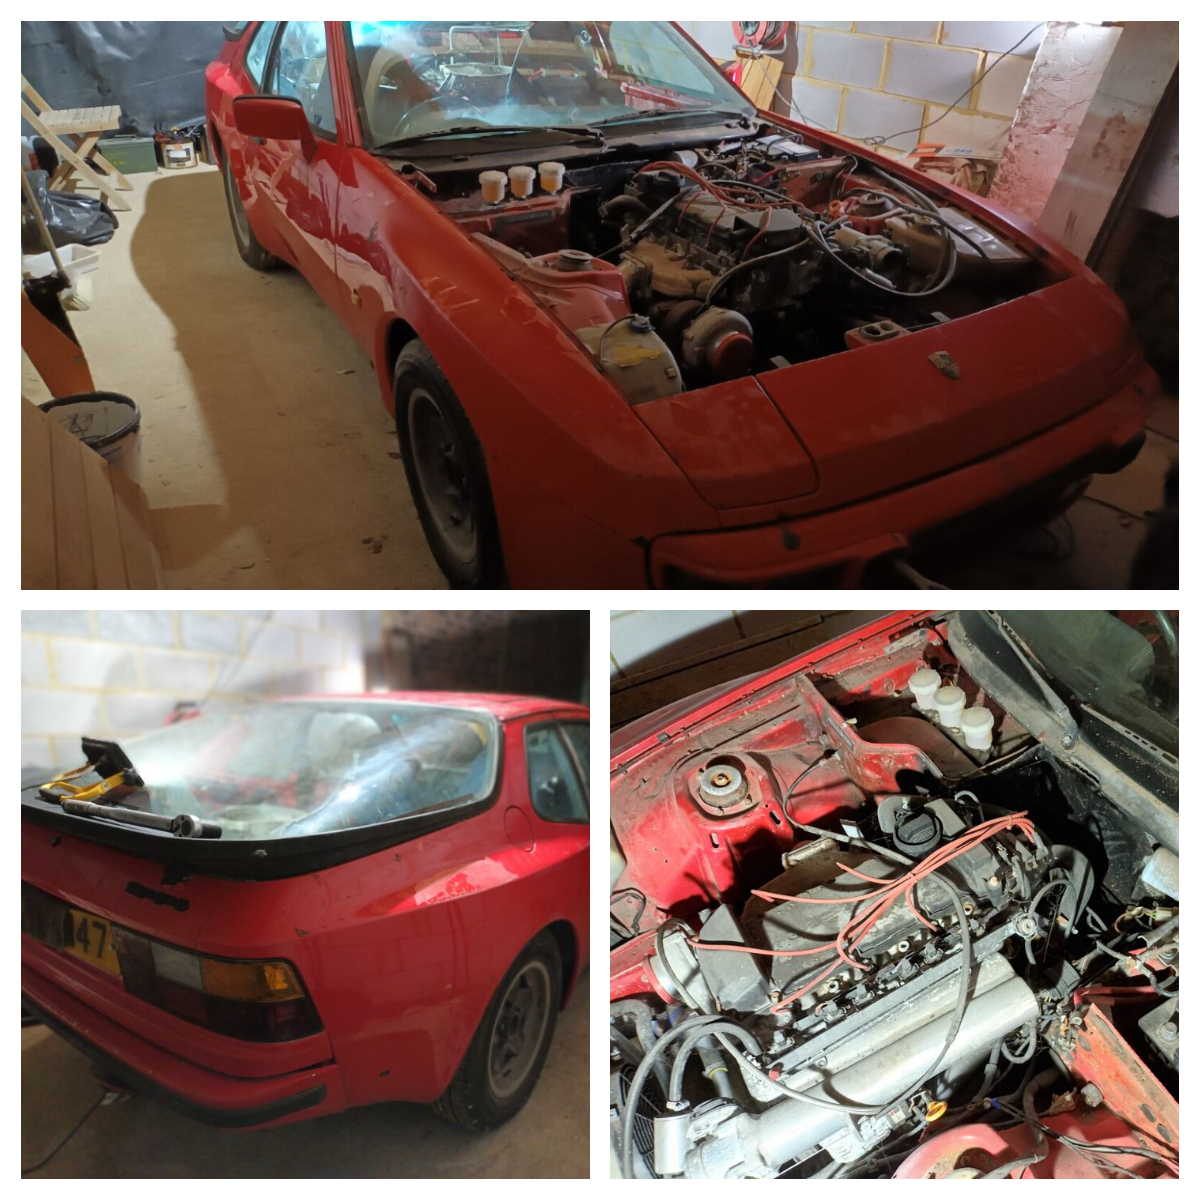 Ad:  Porsche 944 VR6 Turbo Project
On eBay here -->> ow.ly/rpCE50Qorv9

 #Porsche944 #VR6Turbo #ProjectCar #CarRestoration #CarProject #Turbocharged #GermanEngineering #ClassicCar